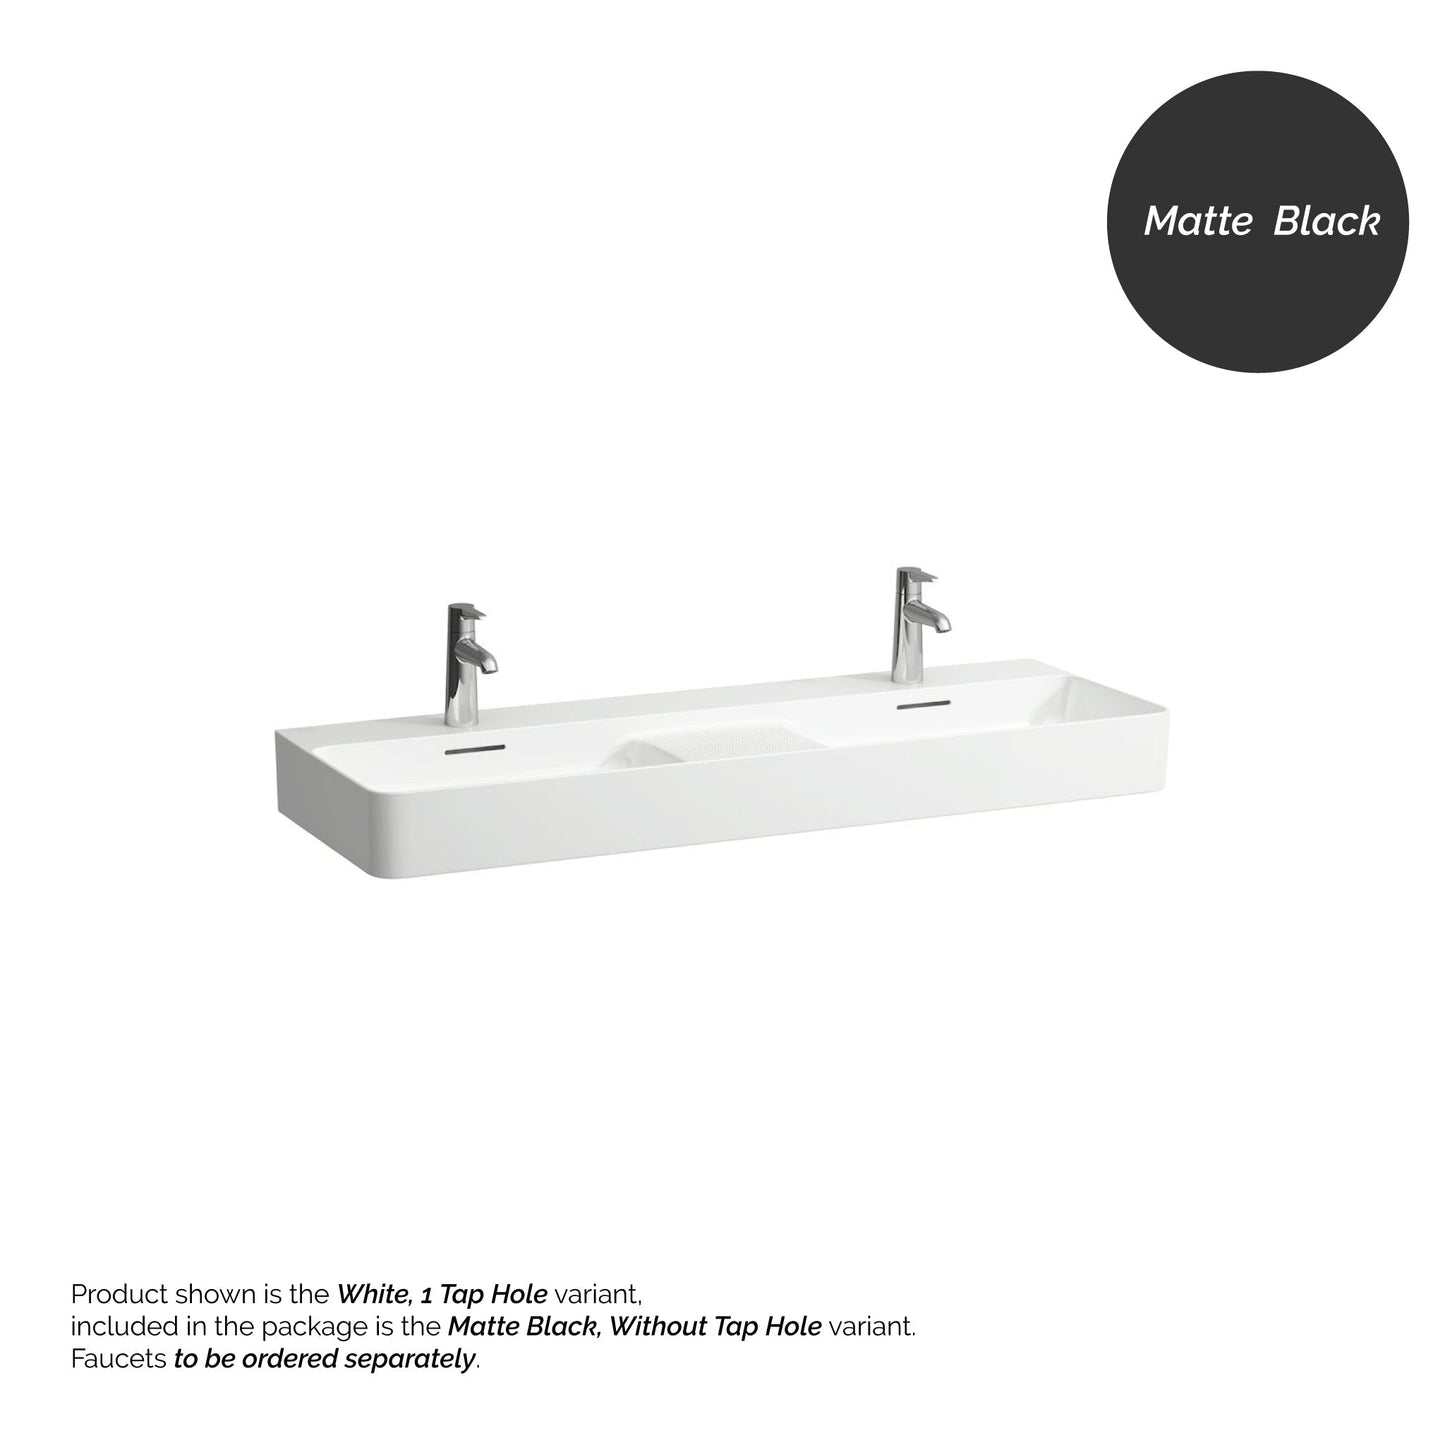 Laufen Val 47" x 17" Matte Black Ceramic Wall-Mounted Double Bathroom Sink Without Faucet Hole